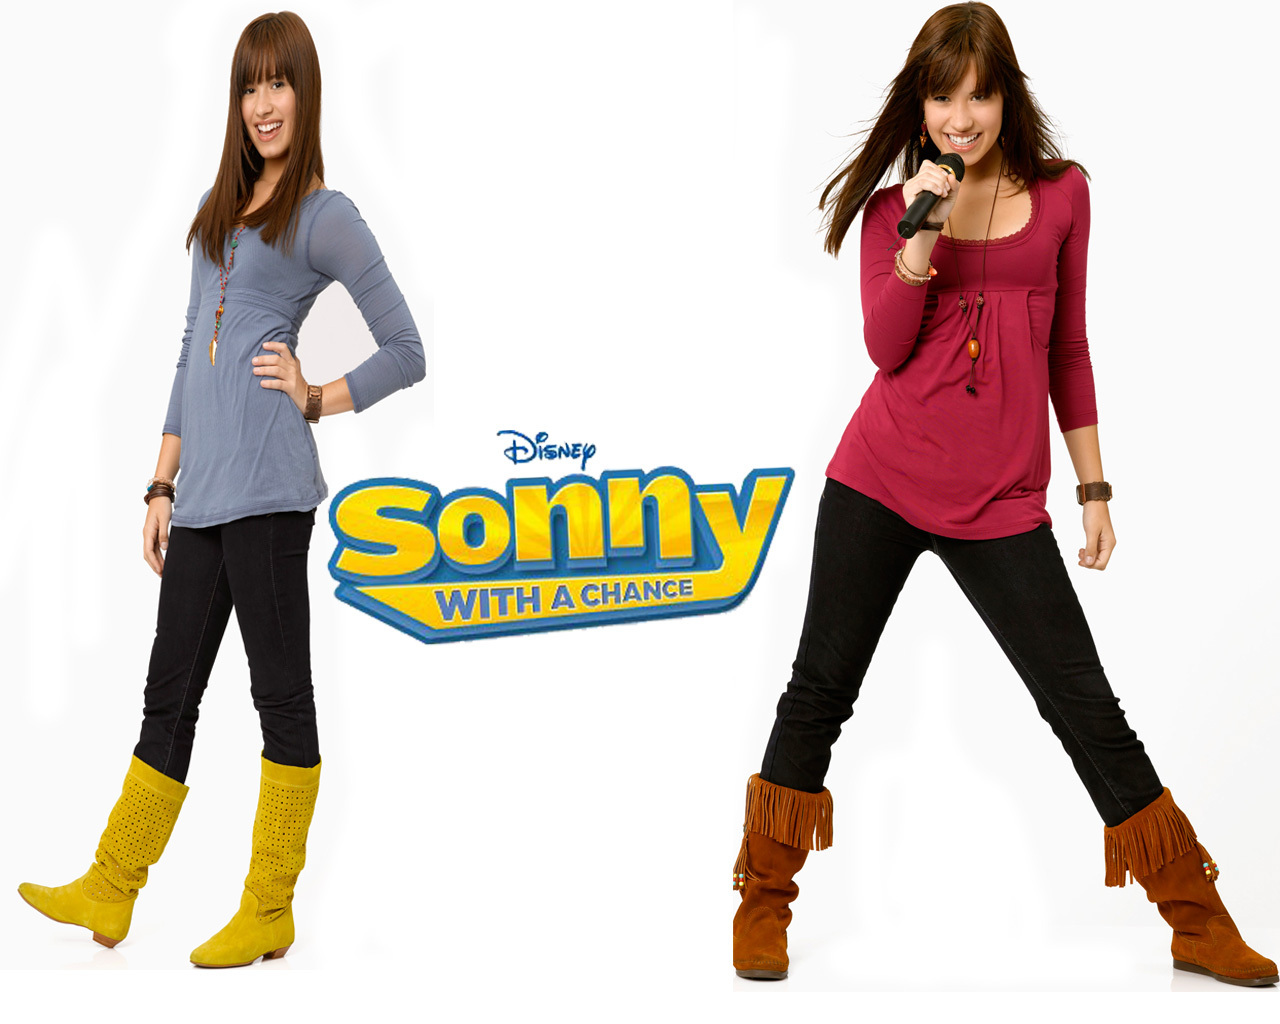 Sonny-with-a-chance-DEMI-LOVATO-sonny-with-a-chance-9421406-1280-1024